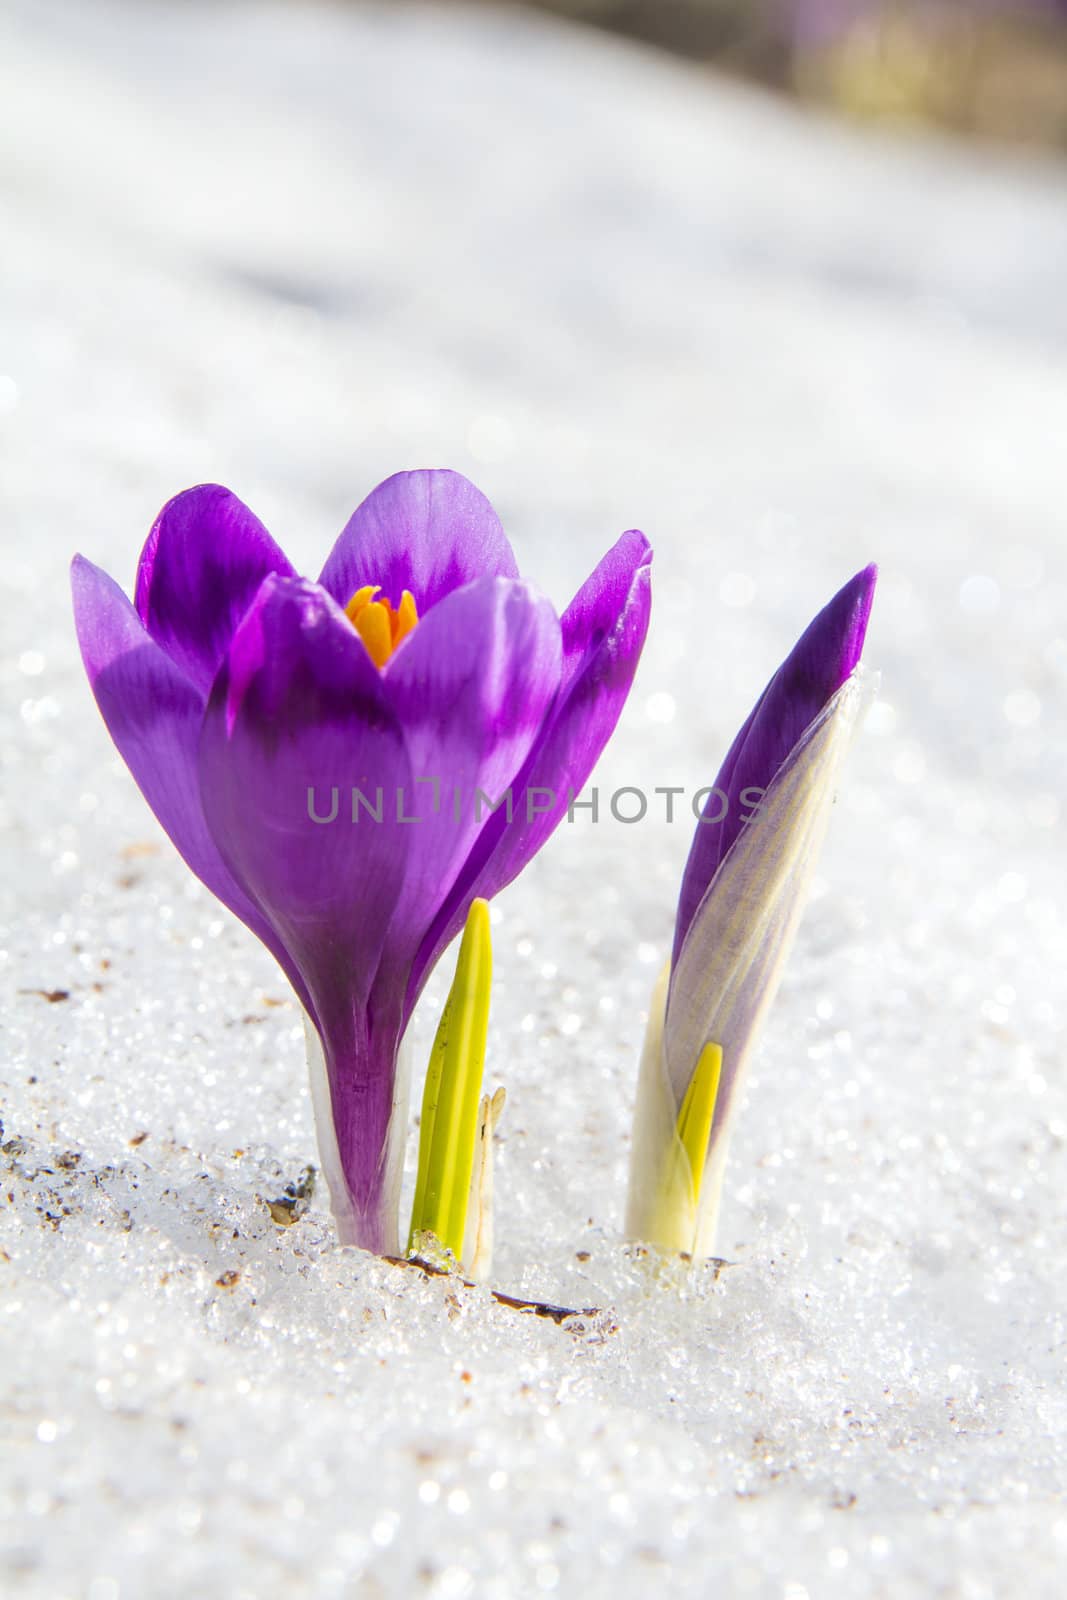 Blossom crocus and bud in the snow